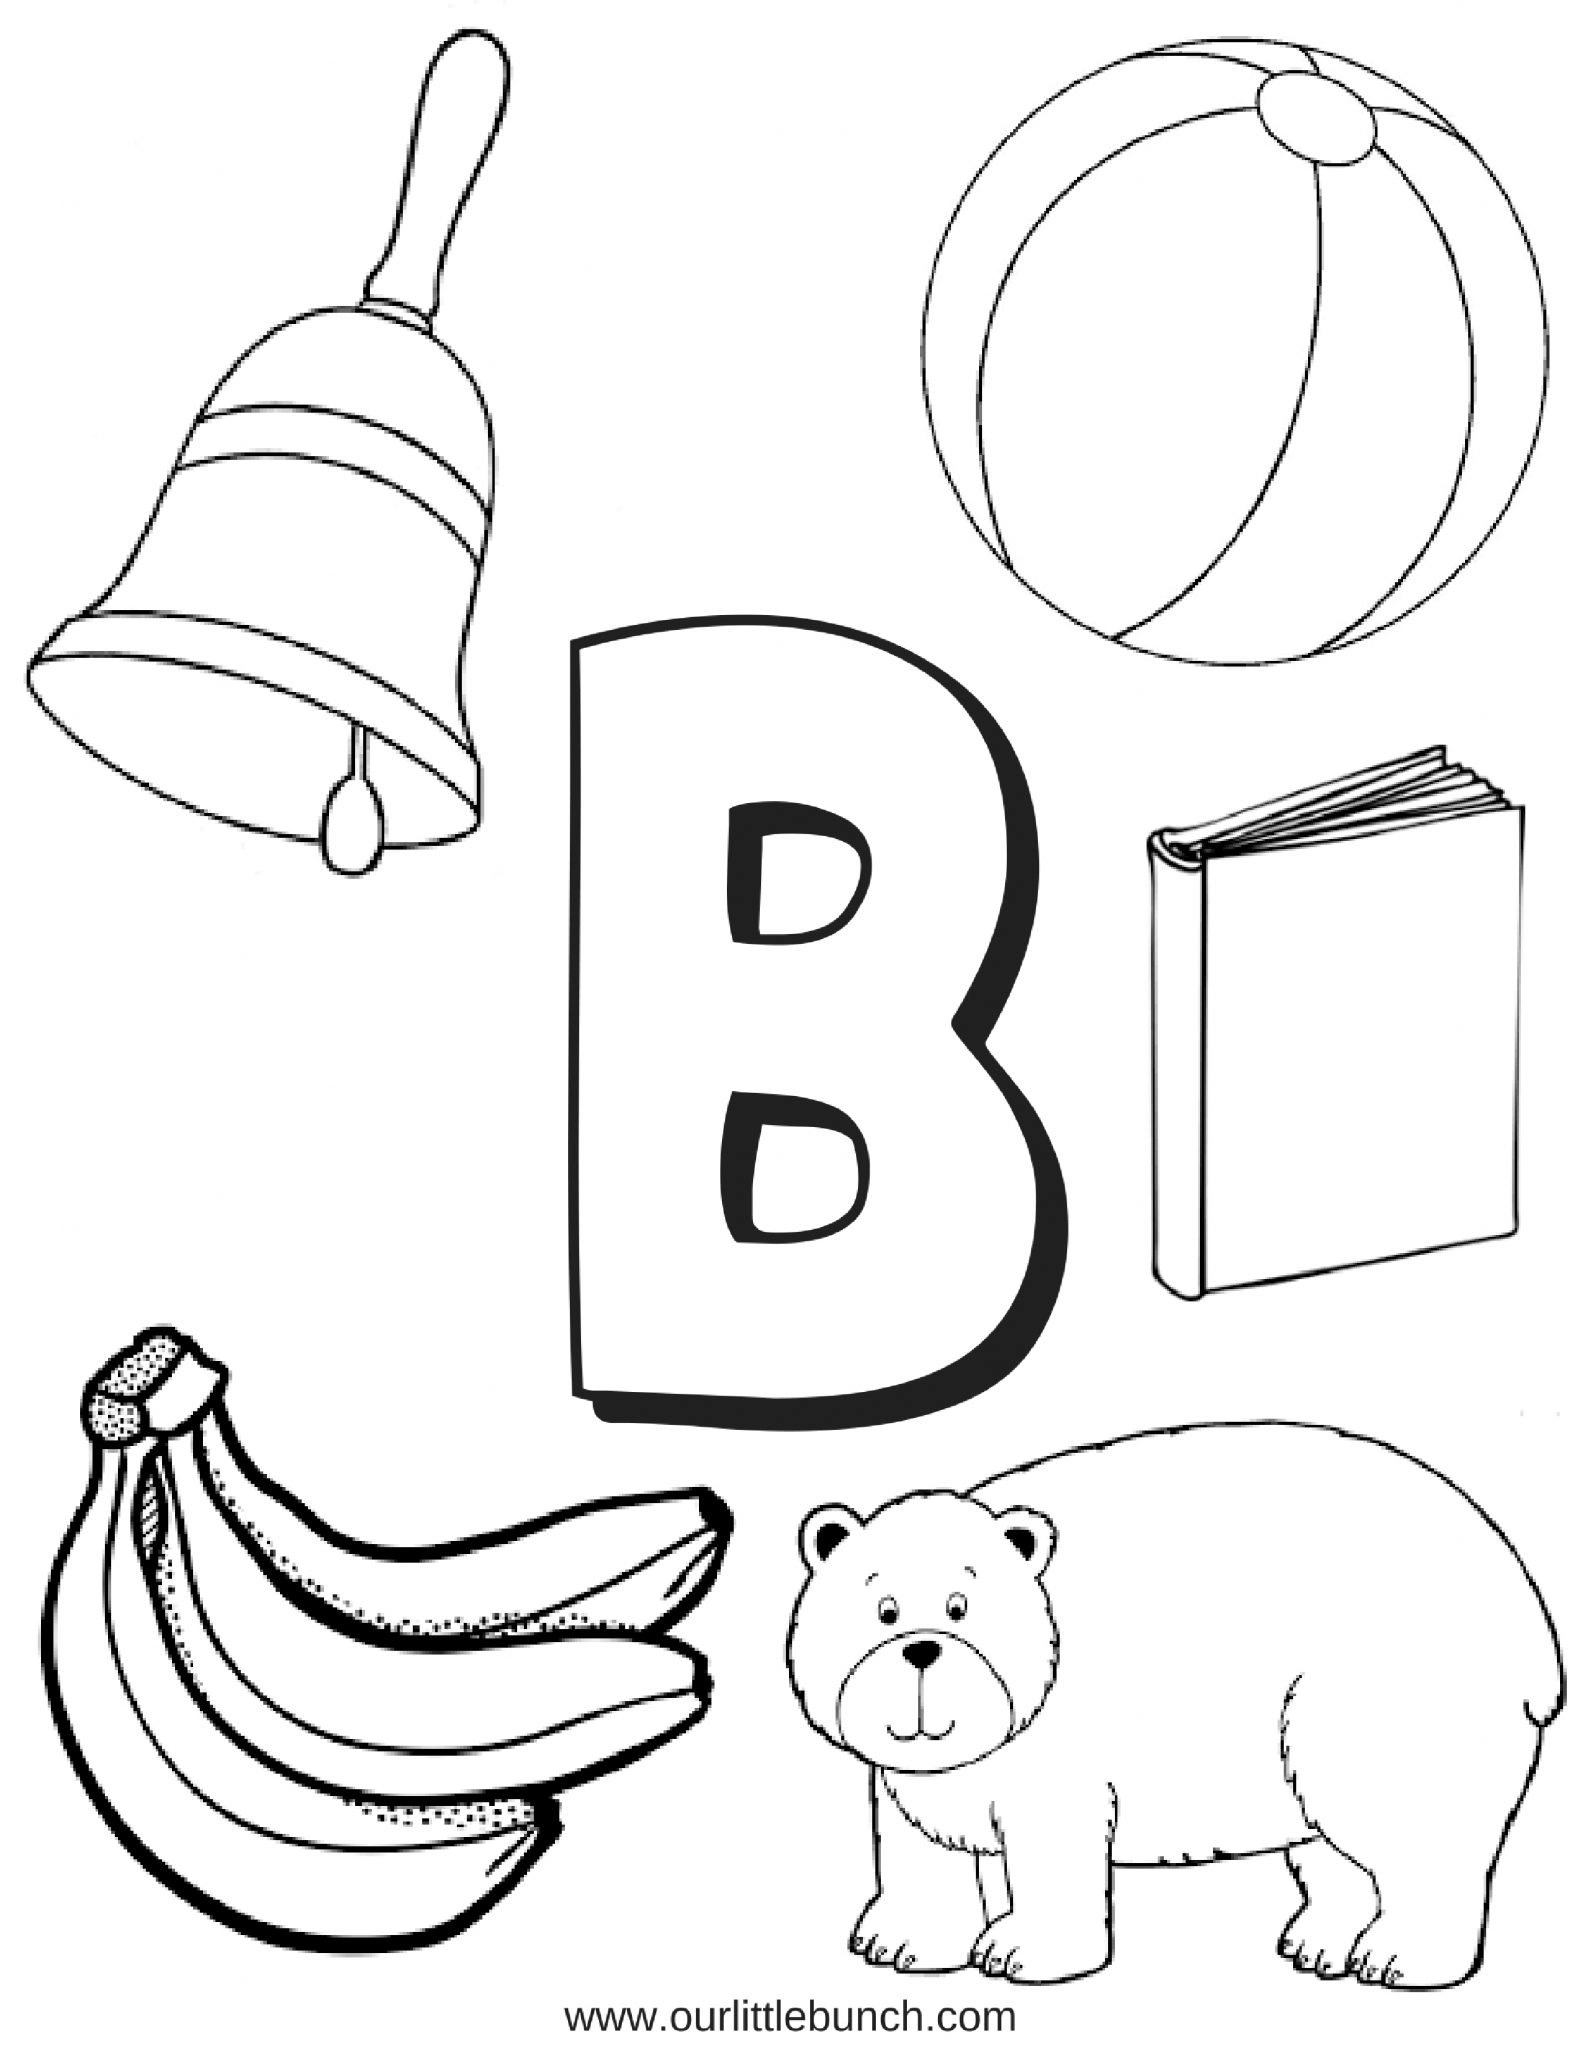 Letter B Let 39 s Learn About The Letter Of The Week Our Little Bunch